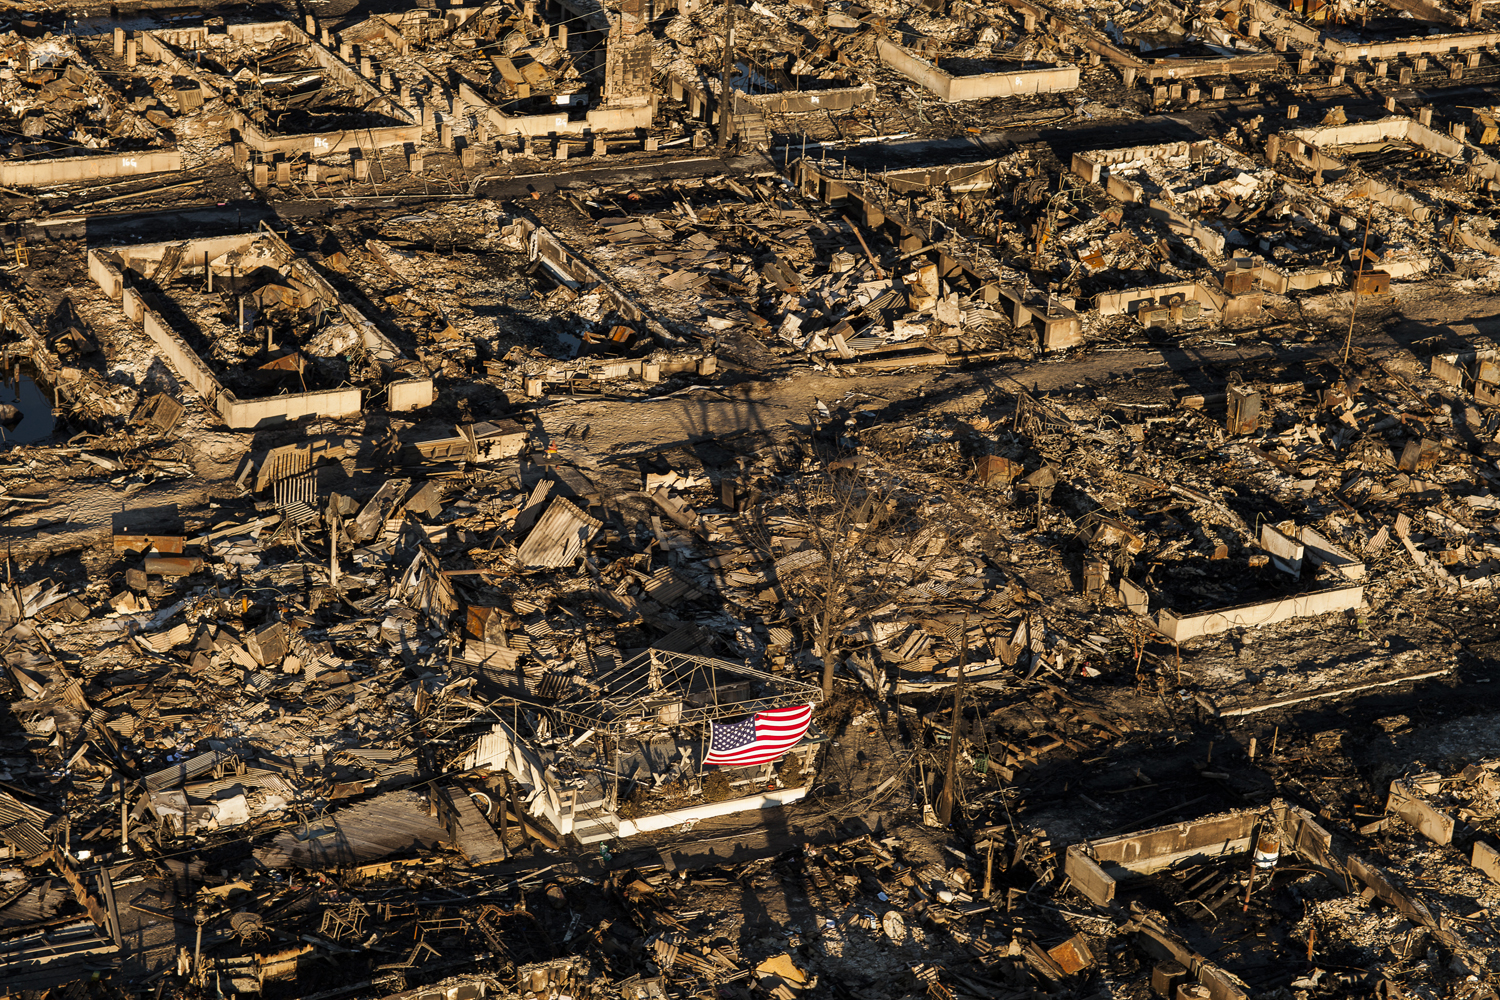 Image: Nov. 3, 2012. An American flag in a burned out area of Breezy Point, Queens, N.Y. More than 80 homes were destroyed by wind-fed fire during hurricane Sandy.